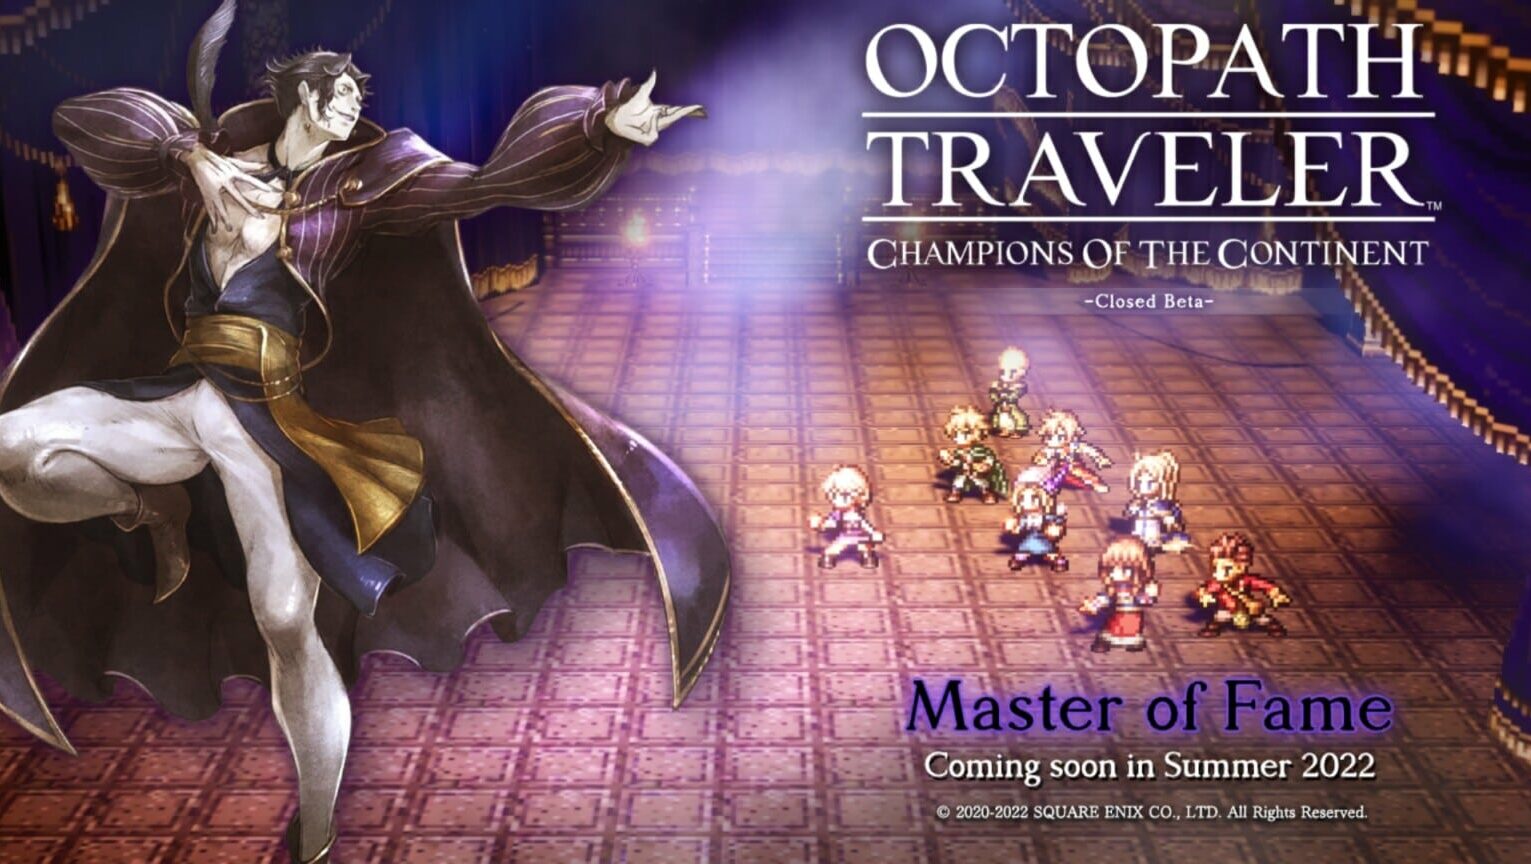 Octopath Traveler: Champions of the Continent (Video Game) - TV Tropes